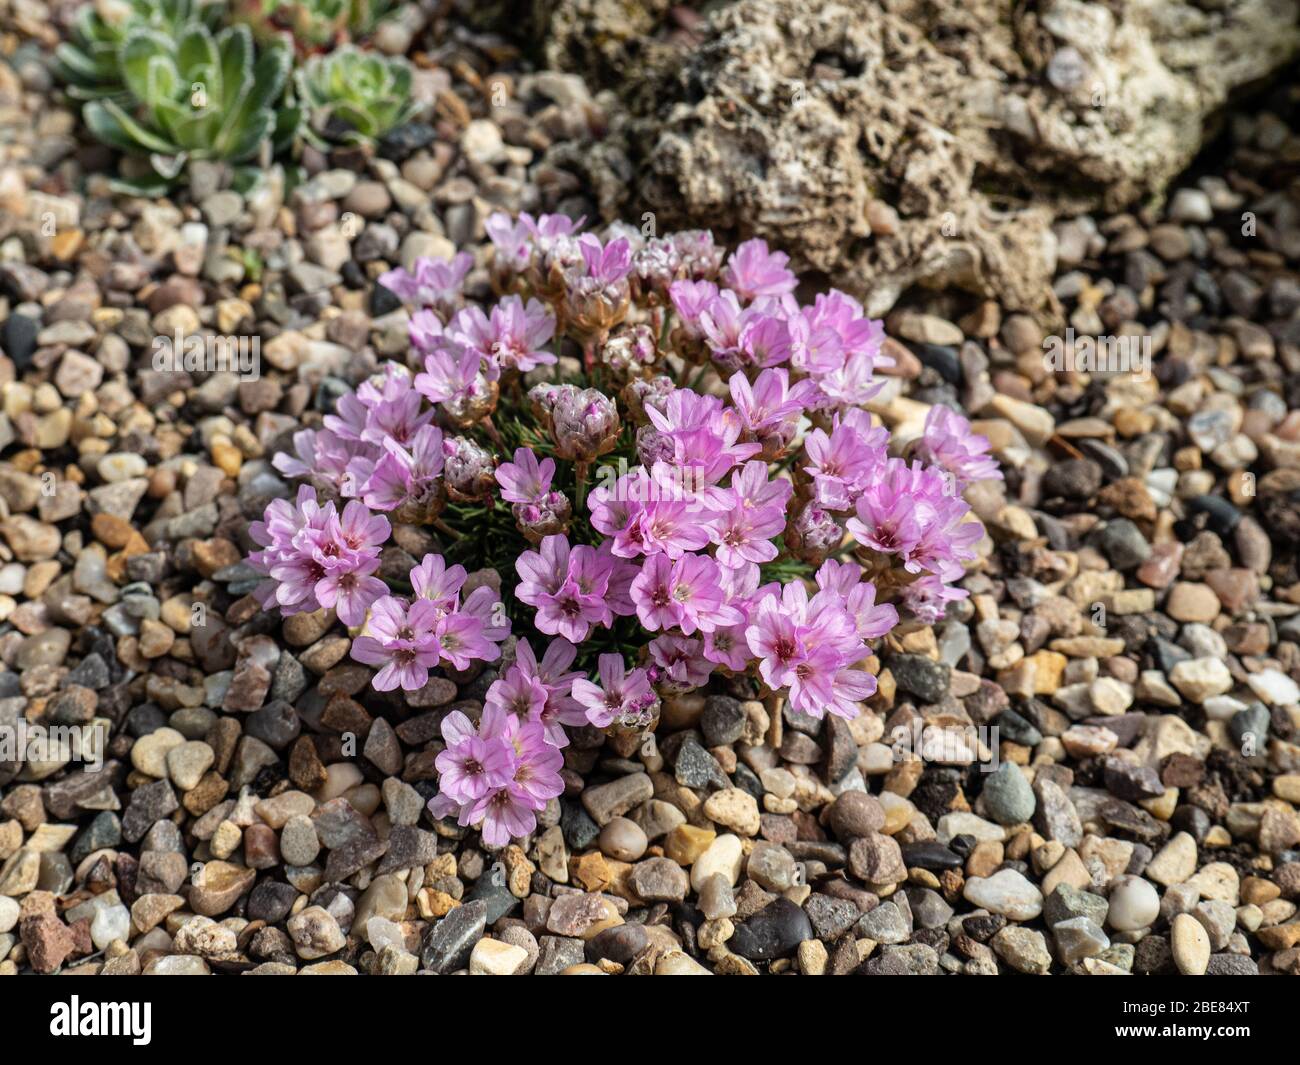 A close up of a Armeria juniperifolia Bevans Variety showing the pale pink flowers Stock Photo